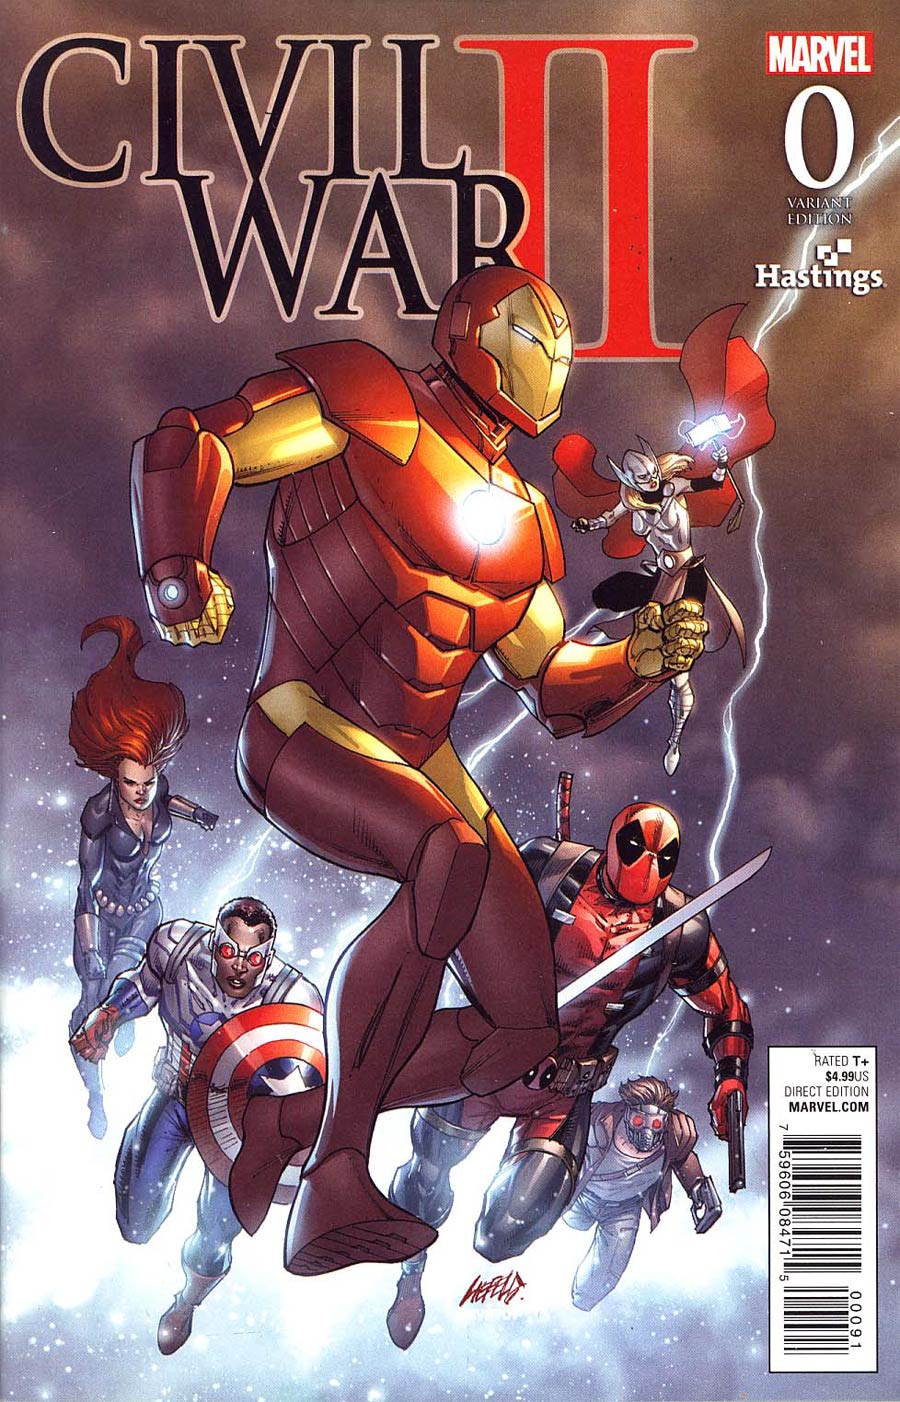 Civil War II #0 Cover H Rob Liefeld Hastings Variant Cover